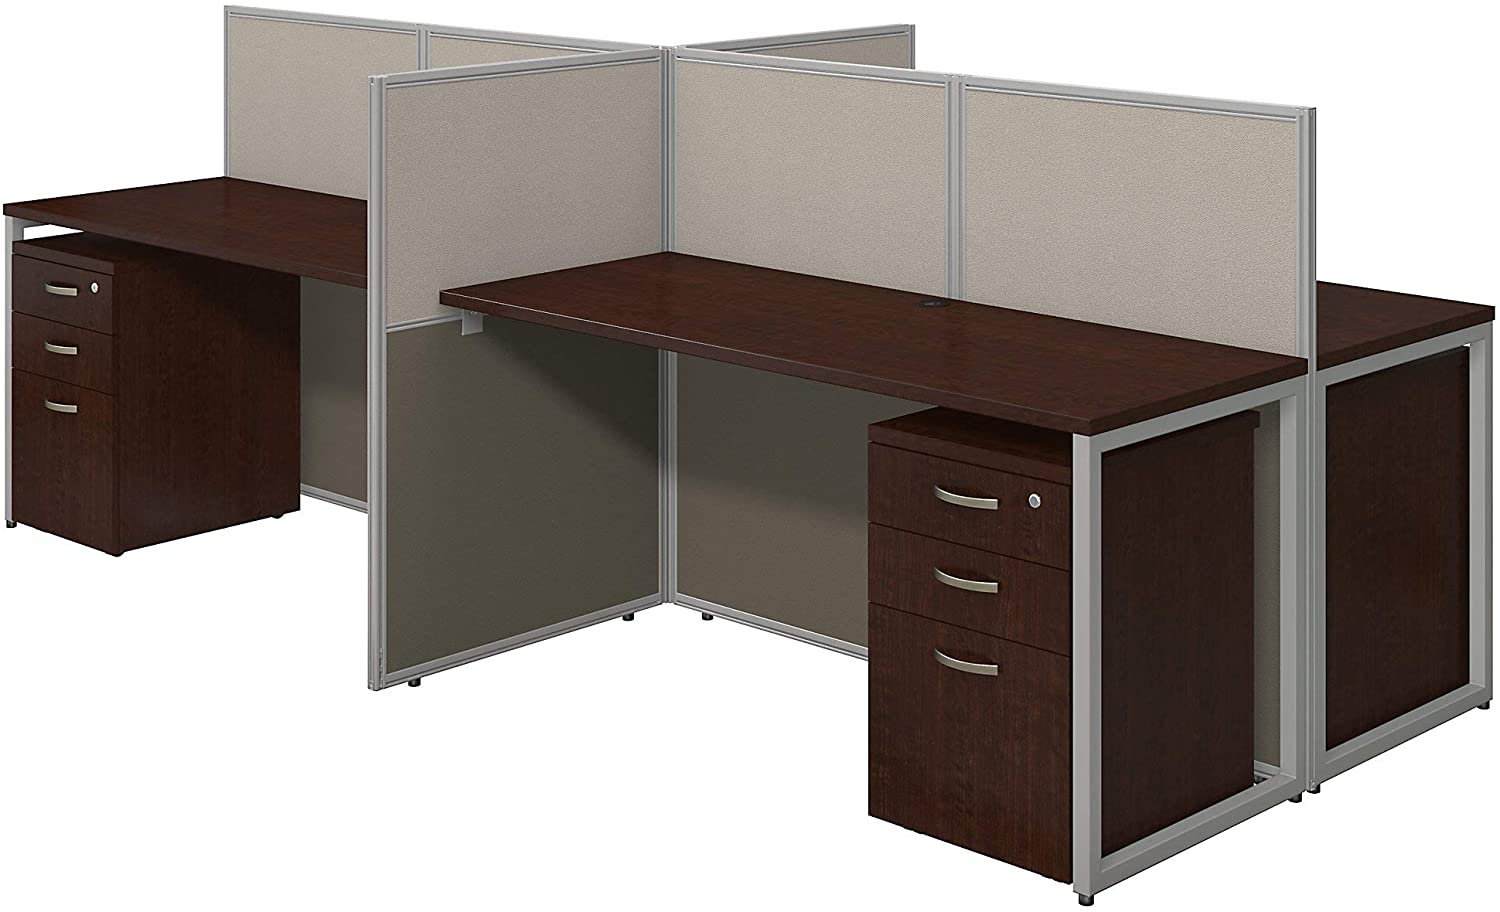 Bush Business Furniture Easy Office 4 Person Cubicle Desk with File Cabinets, 60W x 45H, Mocha Cherry Satin